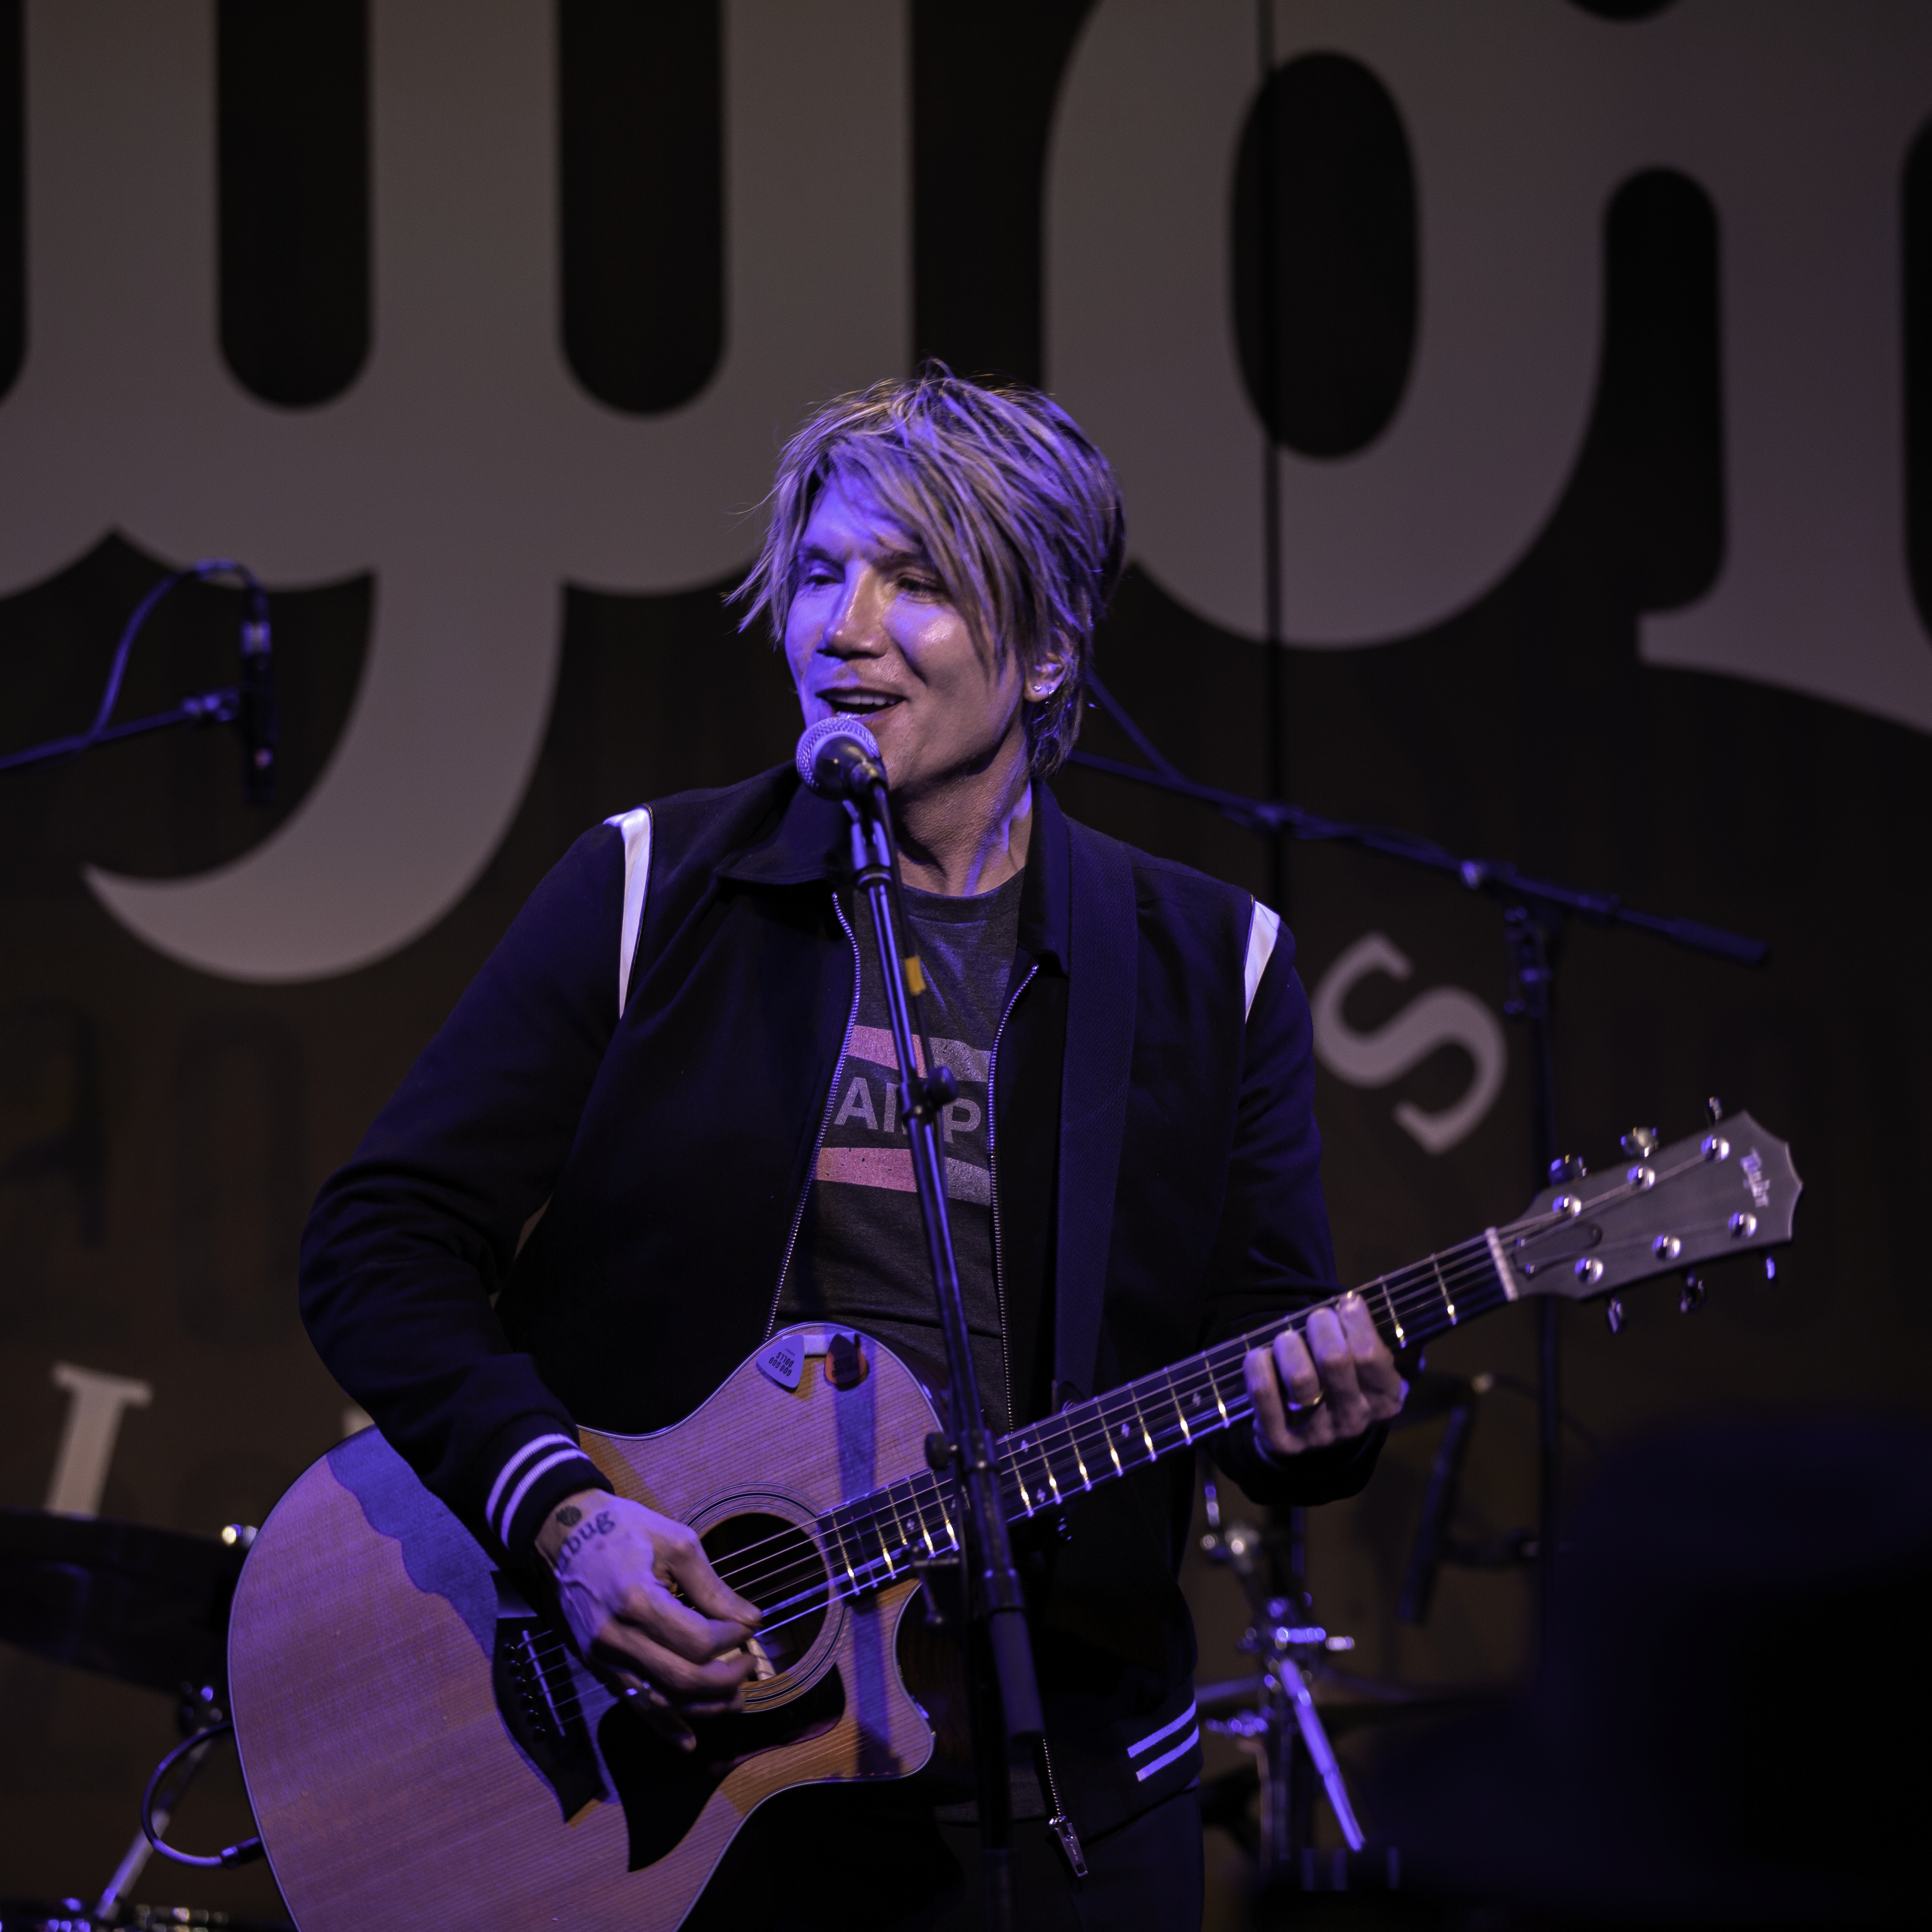 John Rzeznik Details Writing “Broadway” During a ‘Behind the Mic’ Session